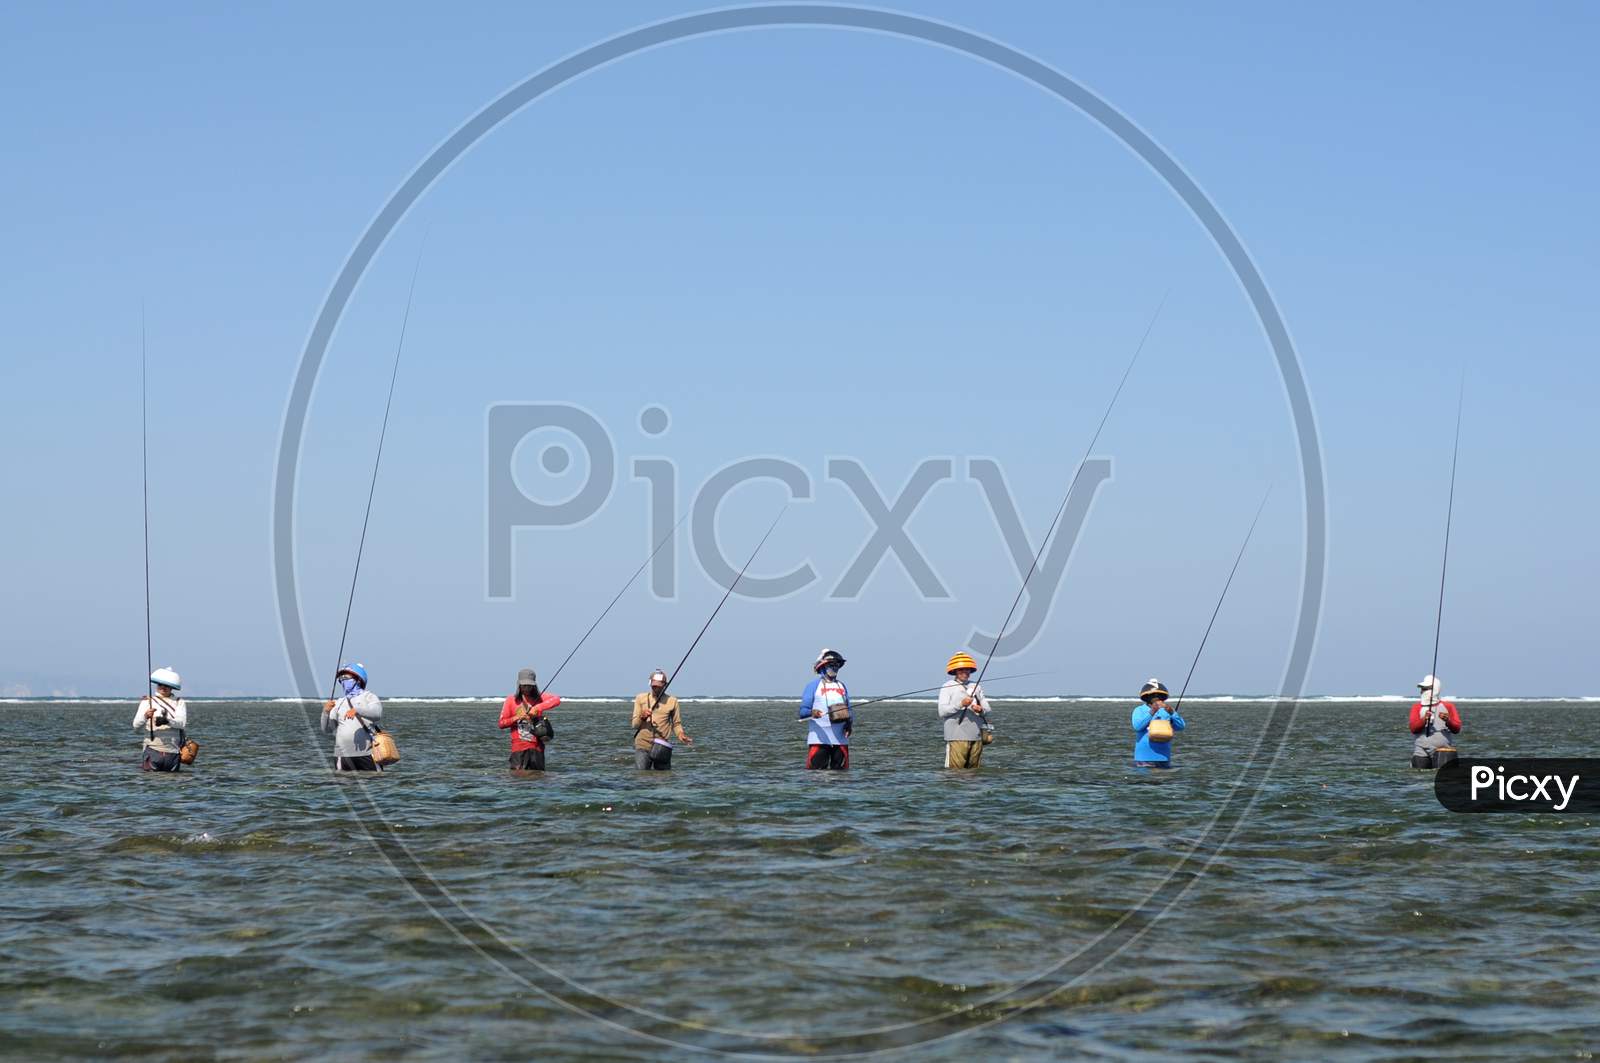 Typical Balinese Fishermen Standing In A Row